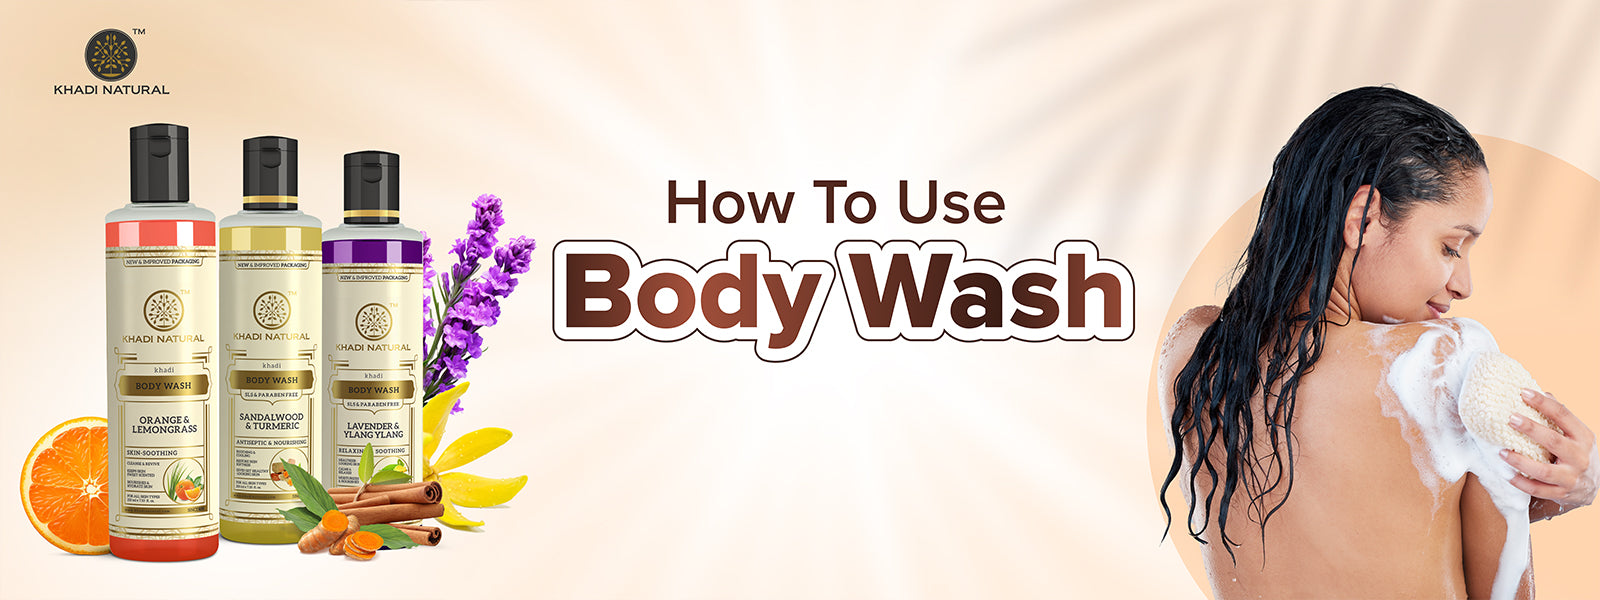 How to use body wash